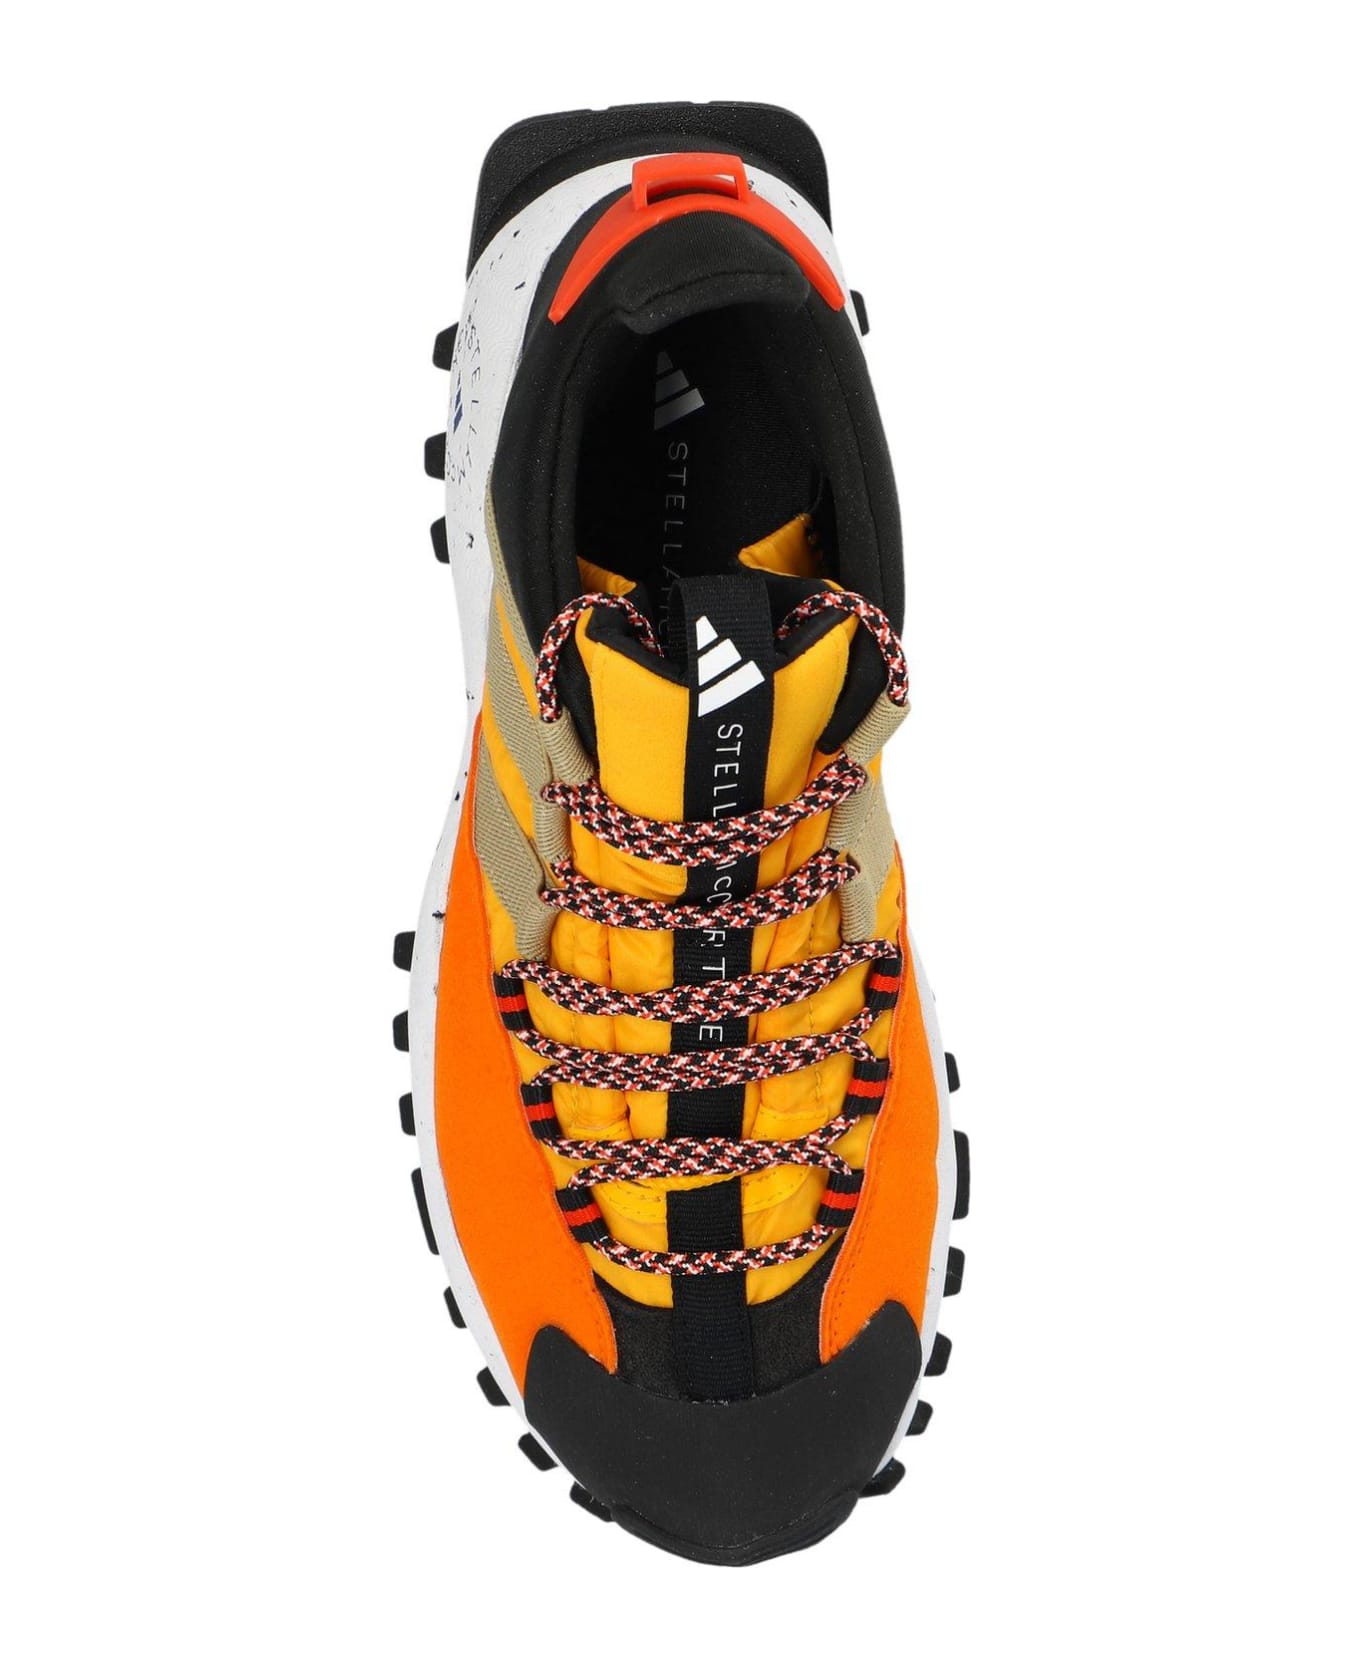 Adidas by Stella McCartney Seeulater Lace-up Sneakers - ORANGE